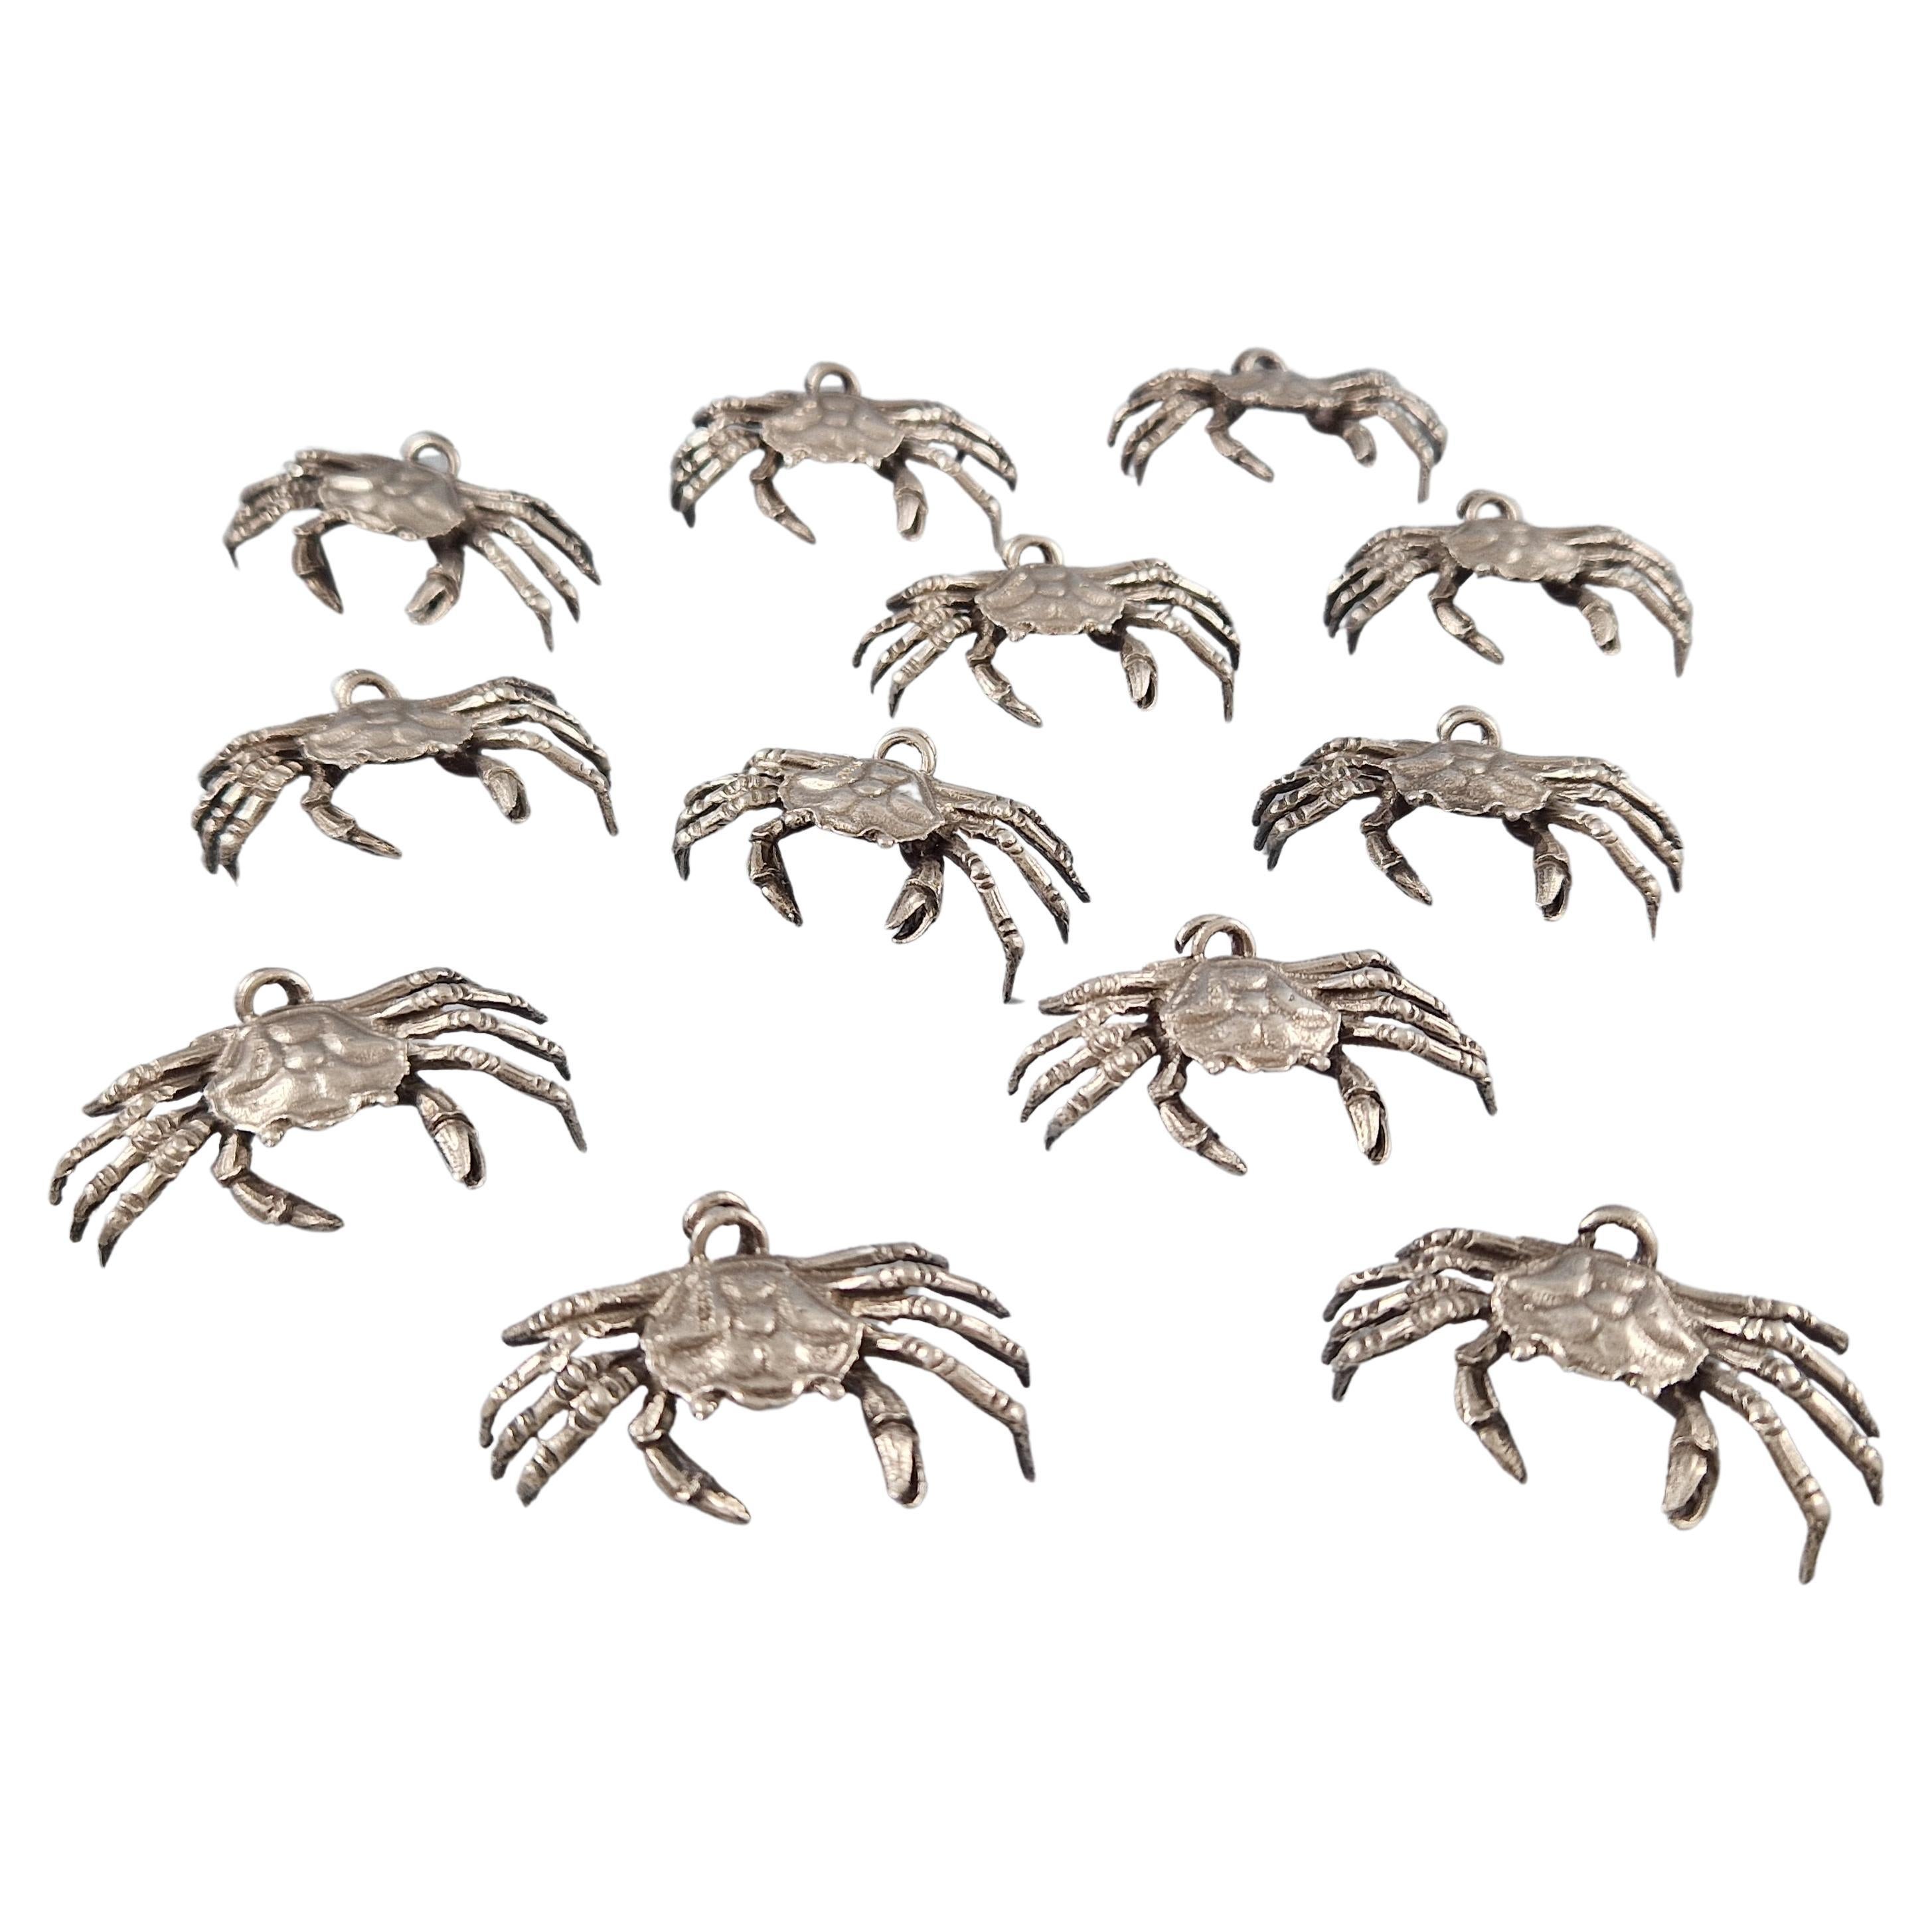 12 Sterling Silver Crab Place Cards Holders